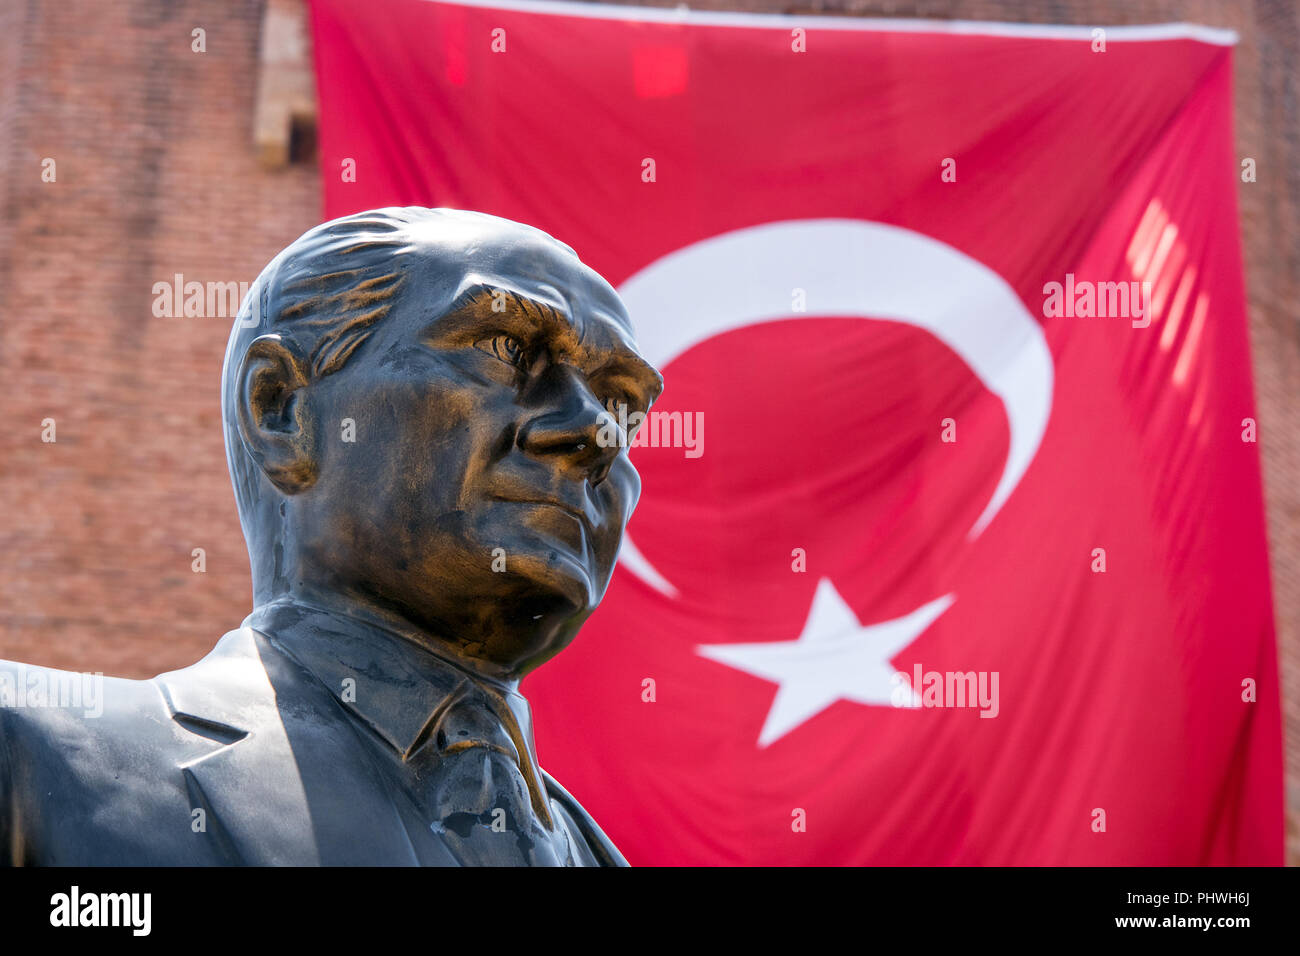 A close up of a proud bronze statue of Mustafa Kemal Atatürk in front of a large red Turkish flag hanging from a building. Stock Photo